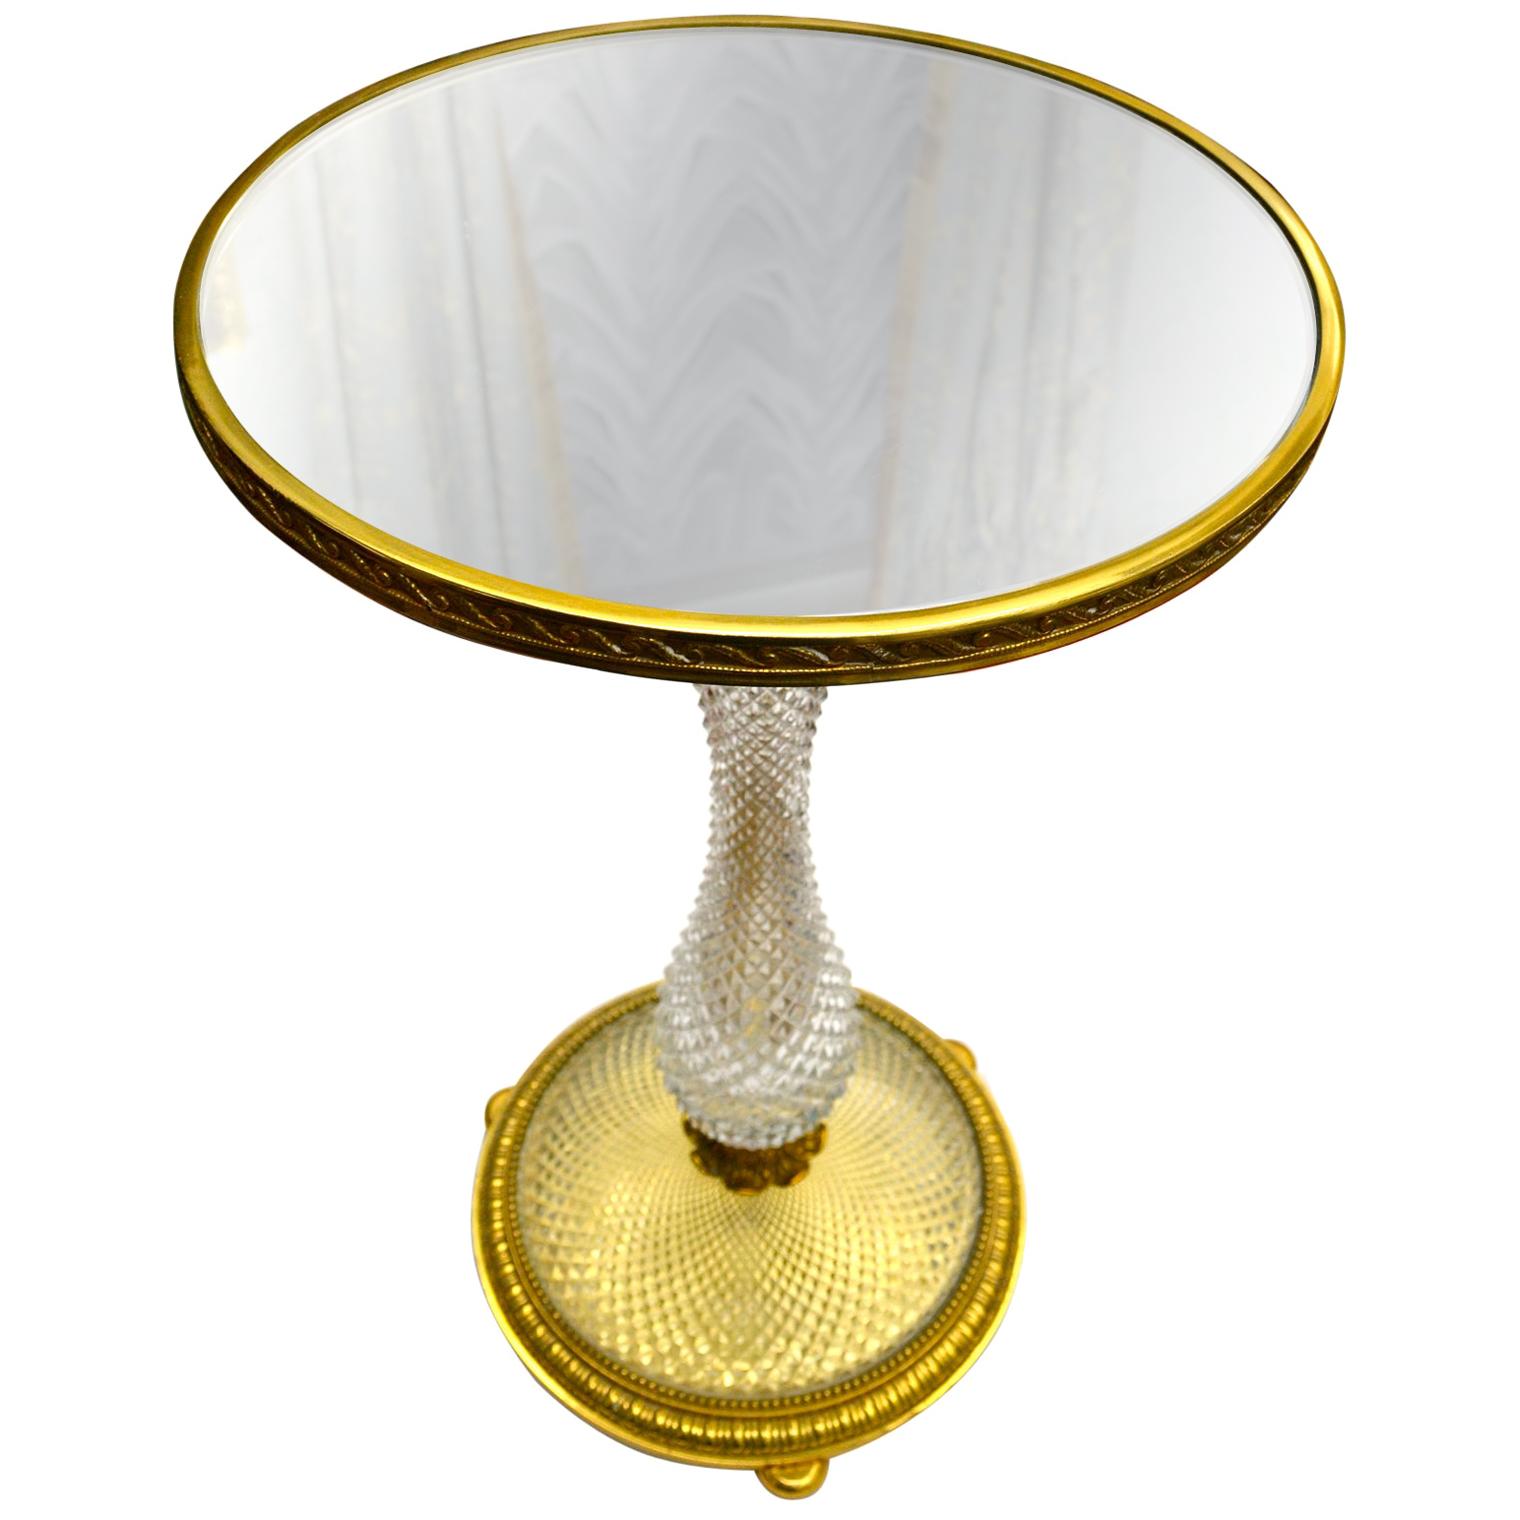 Early 20 Century Cut Crystal and Gilt Bronze Lamp Table Attributed to Baccarat